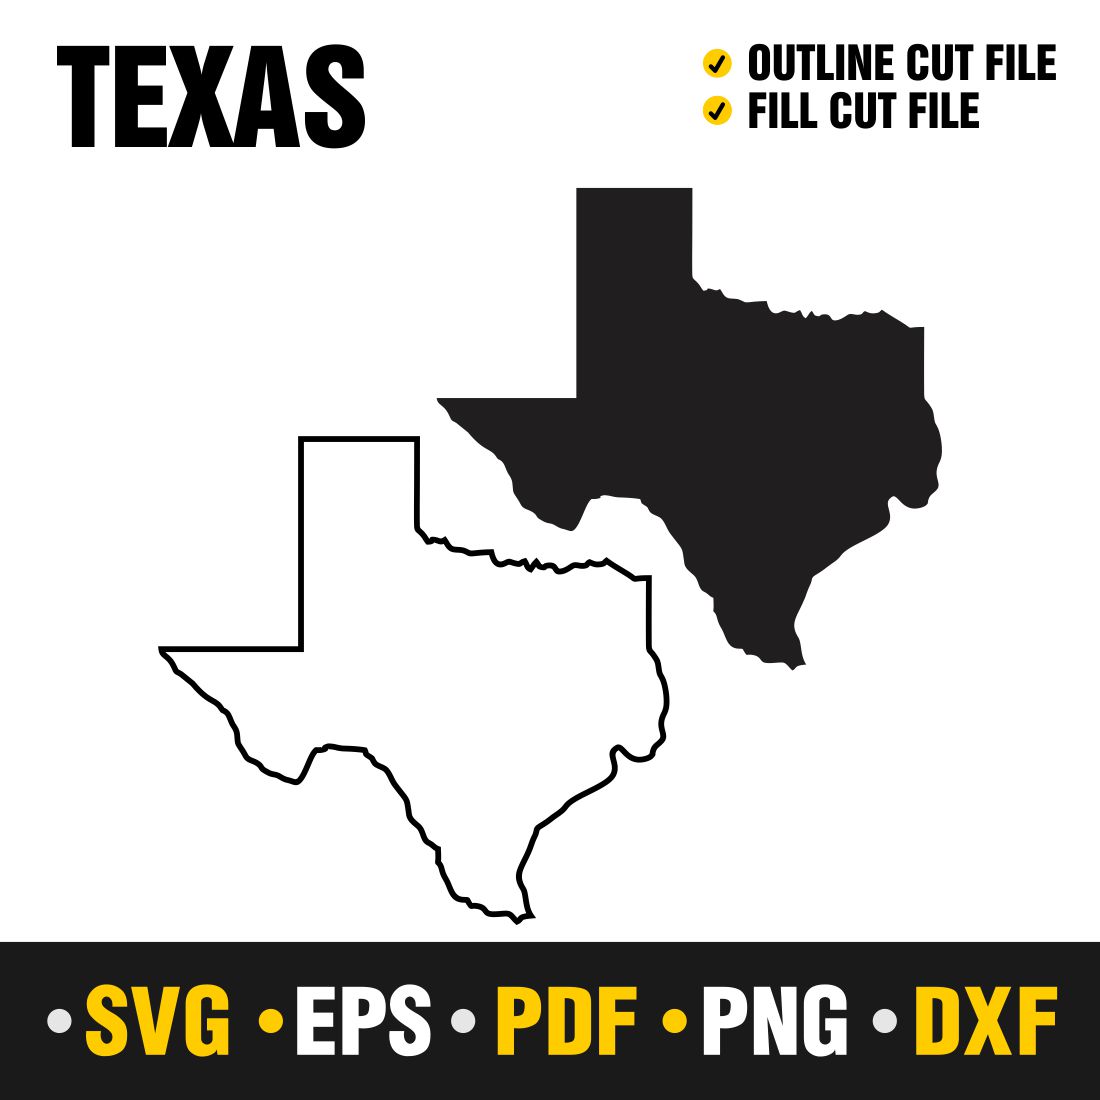 Texas Map SVG, PNG, PDF, EPS & DXF - Texas Vector Files - Perfect for Your USA-Themed Projects cover image.